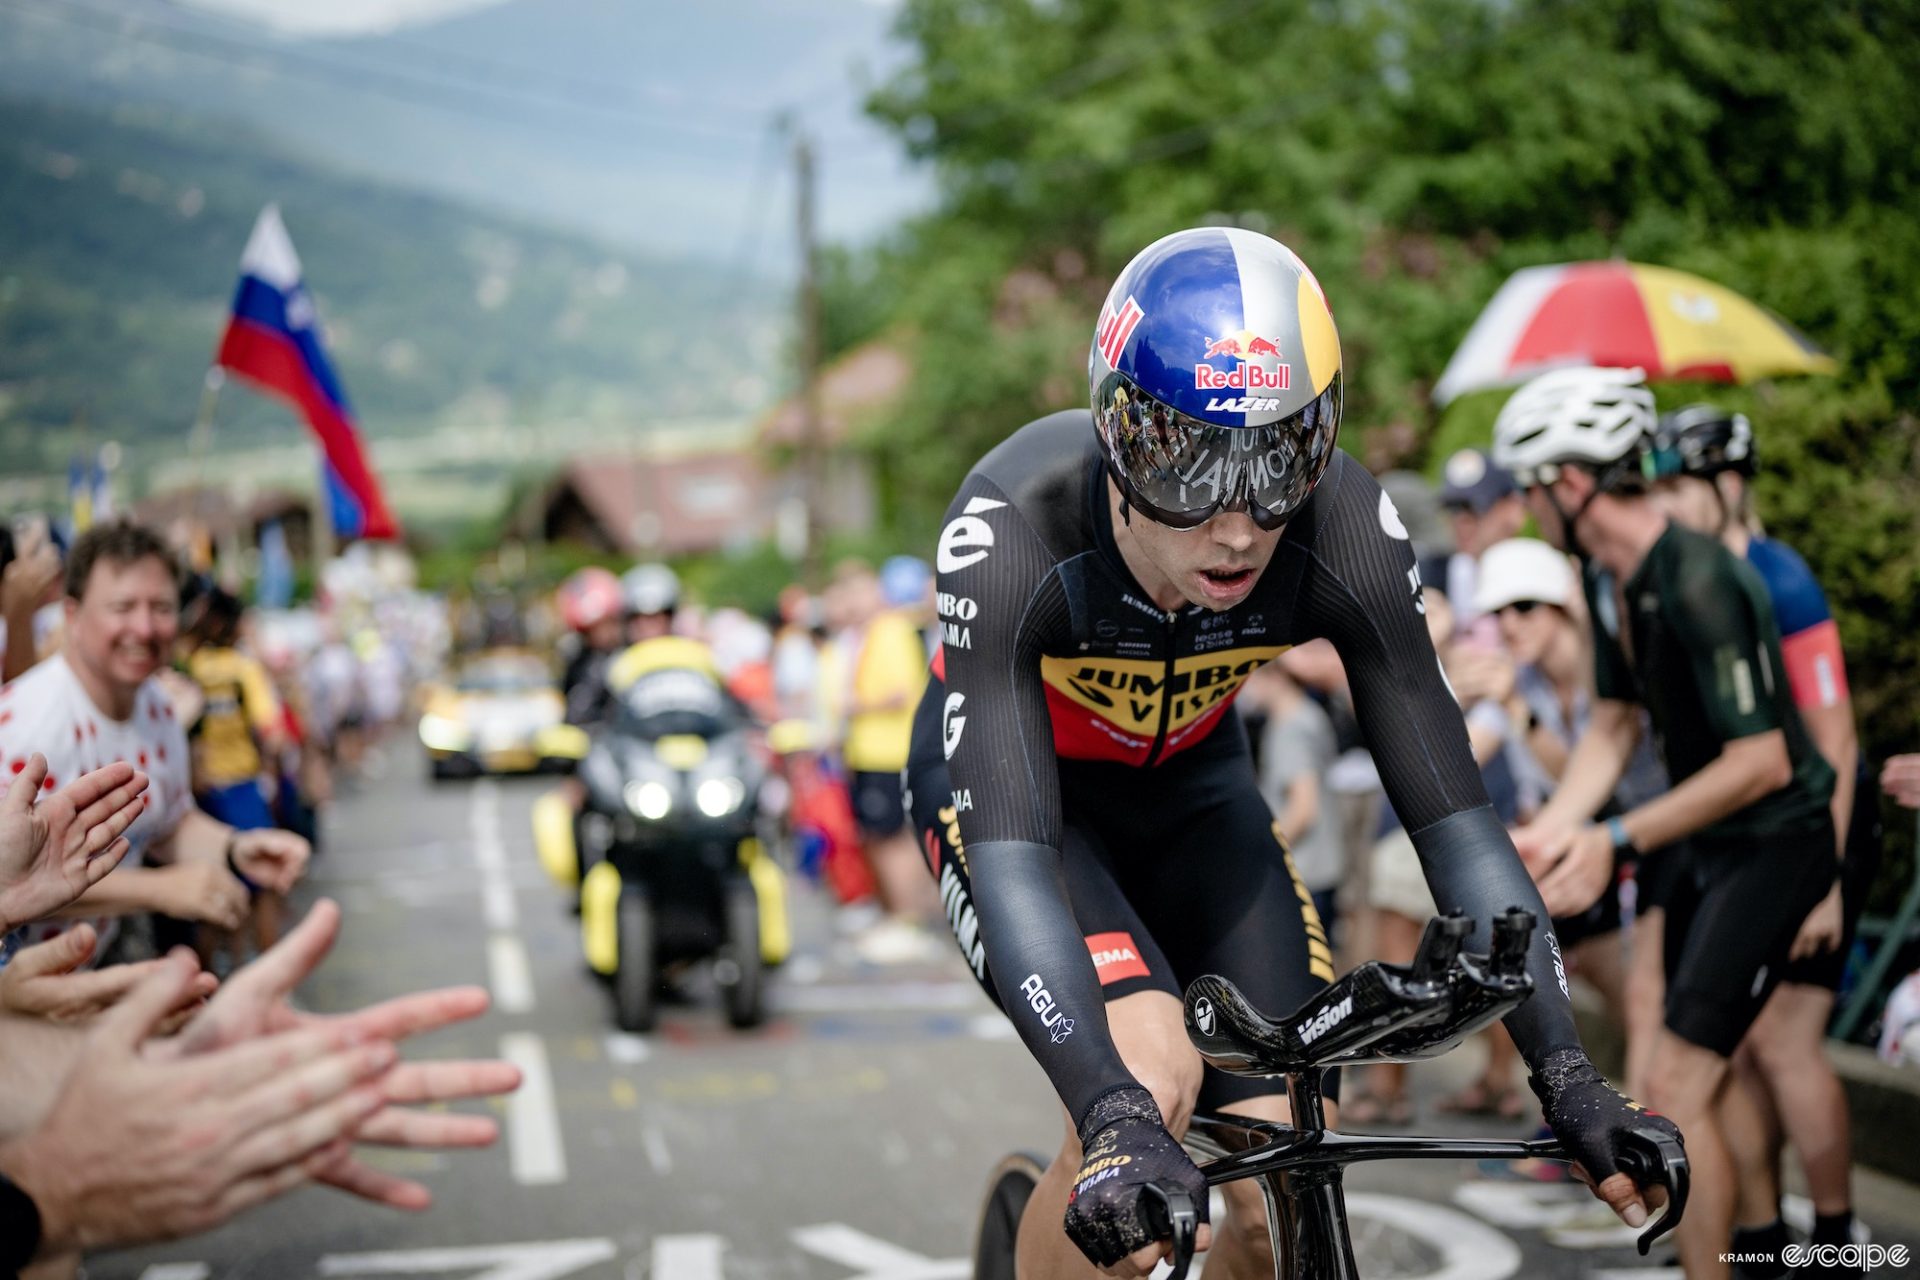 Wout van Aert rides to third on the stage 16 time trial at the Tour de France. Van Aert was bested only by Tadej Pogačar, who is at Worlds, and his winning teammate, Jonas Vingegaard, who is not.